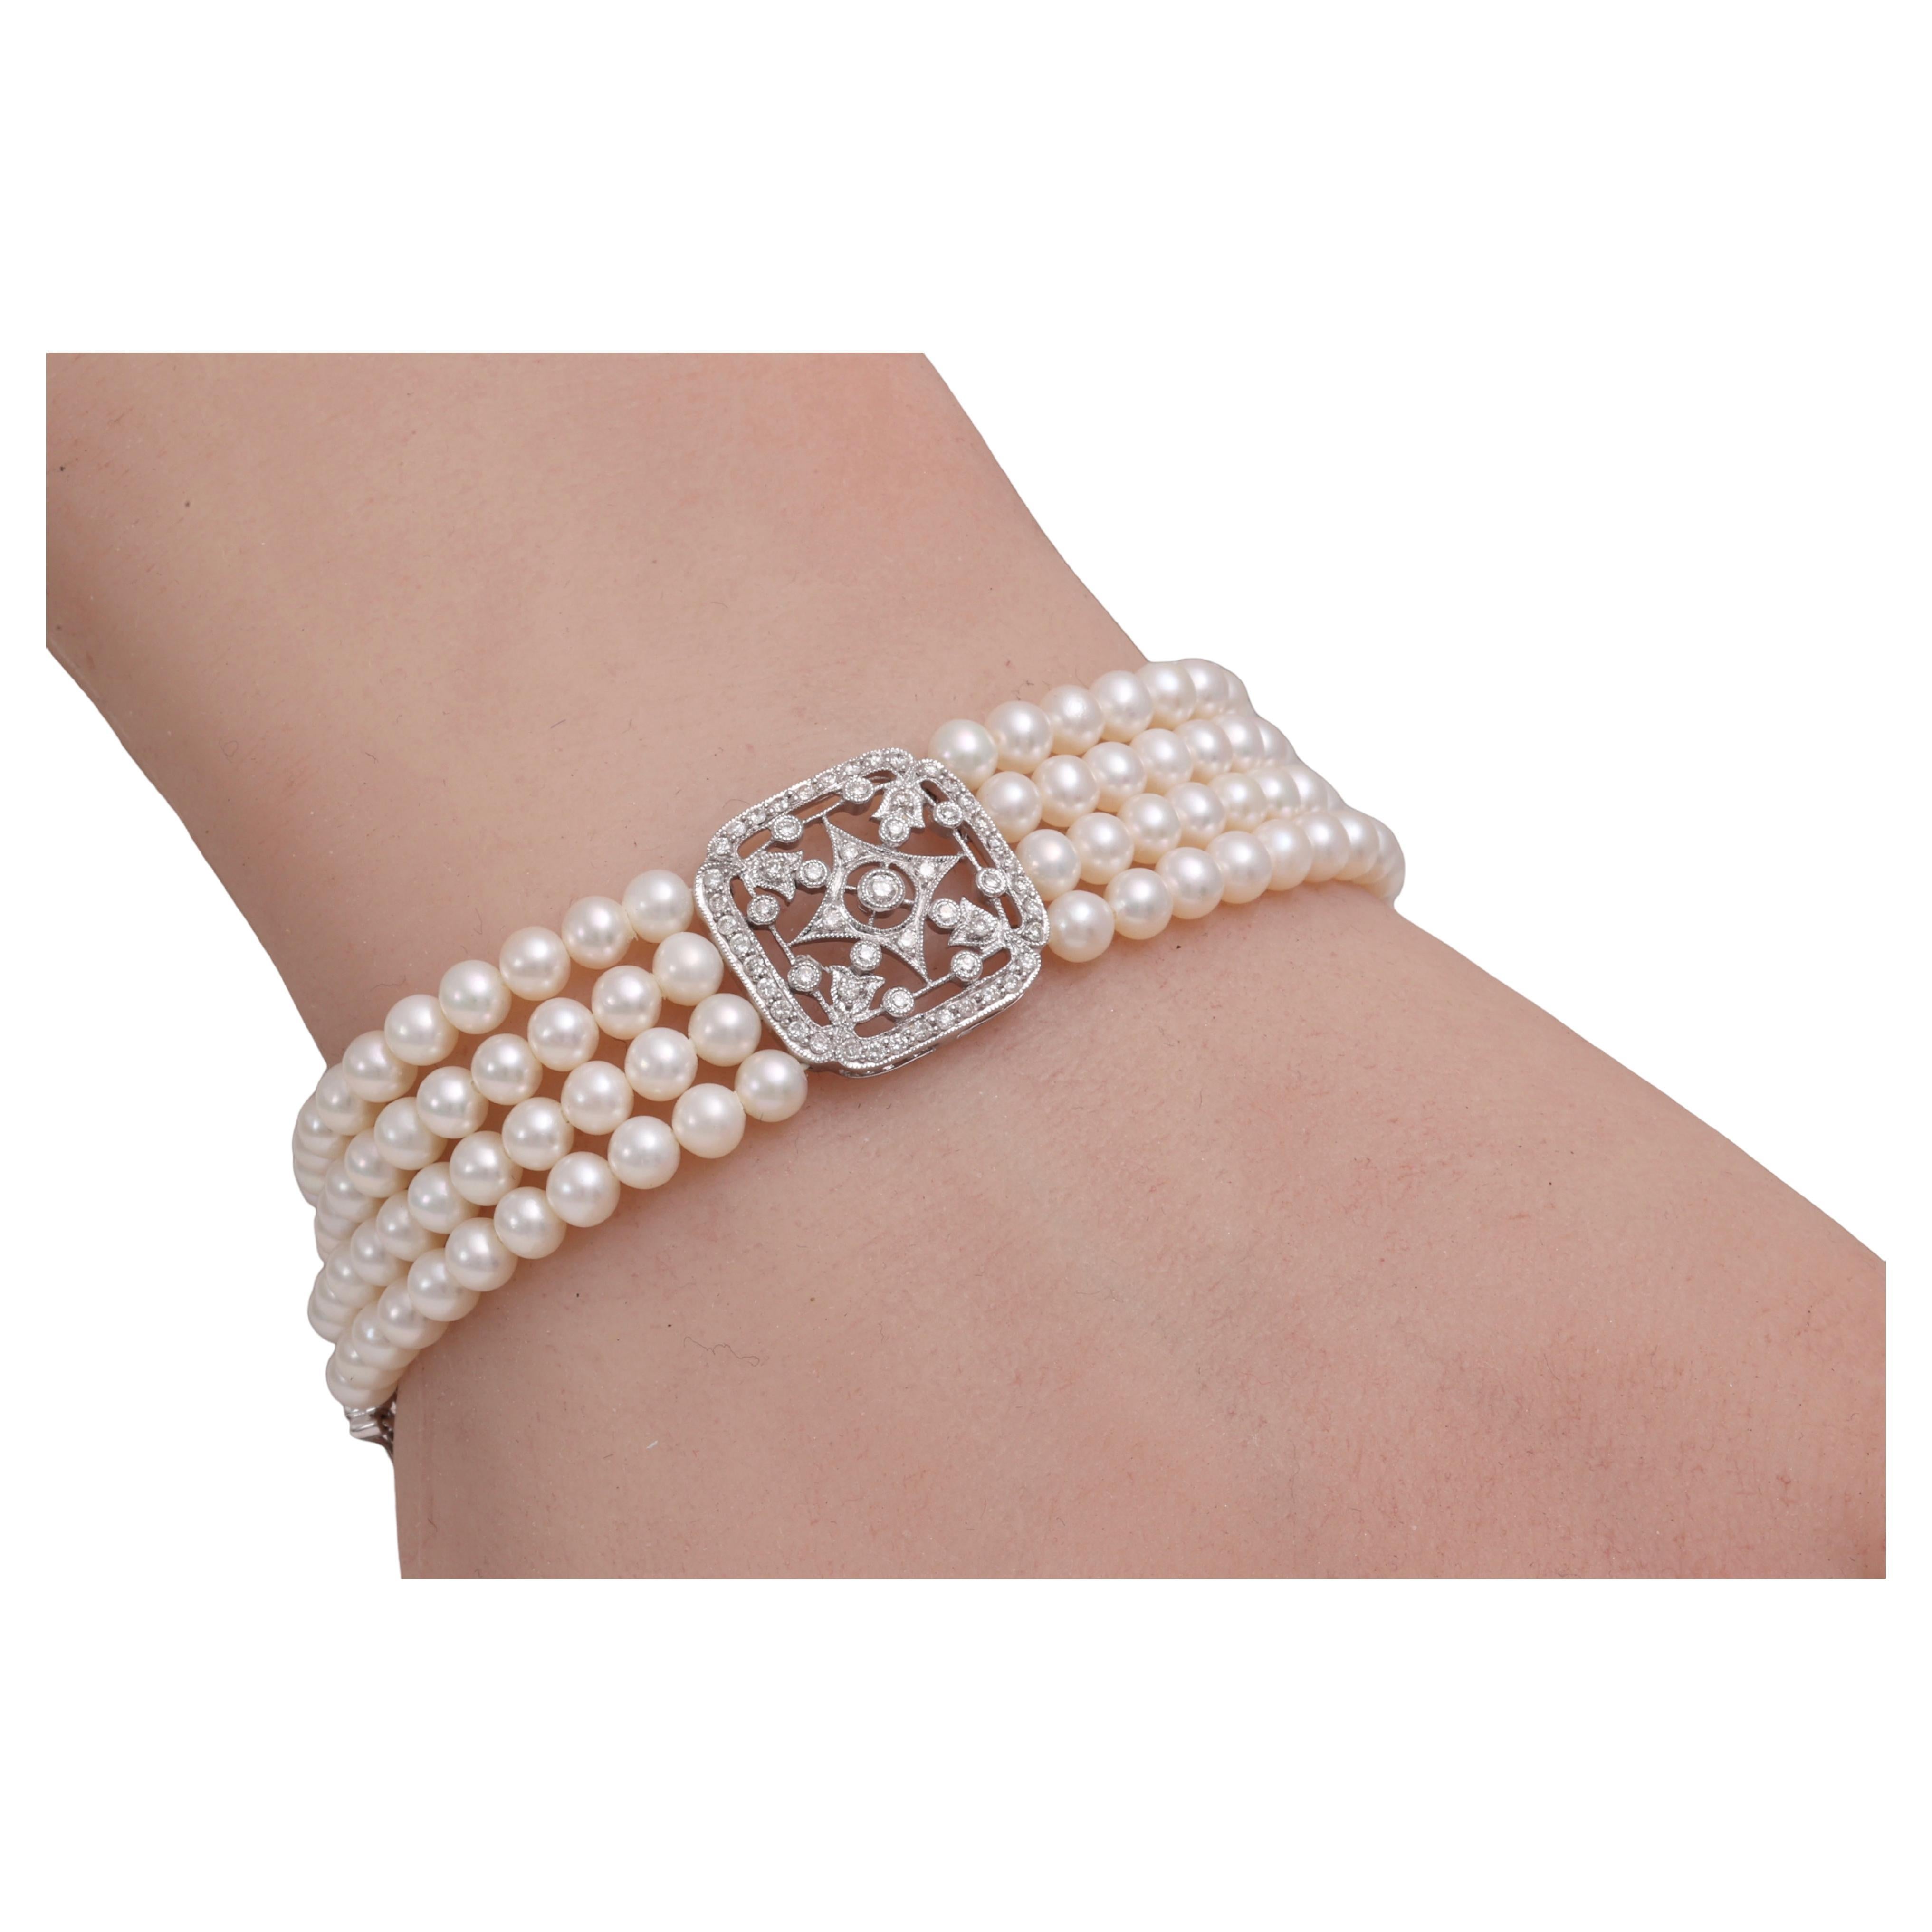 18 kt. White Gold Bracelet with 4 Rows of Pearls and 1.06 ct. Diamonds